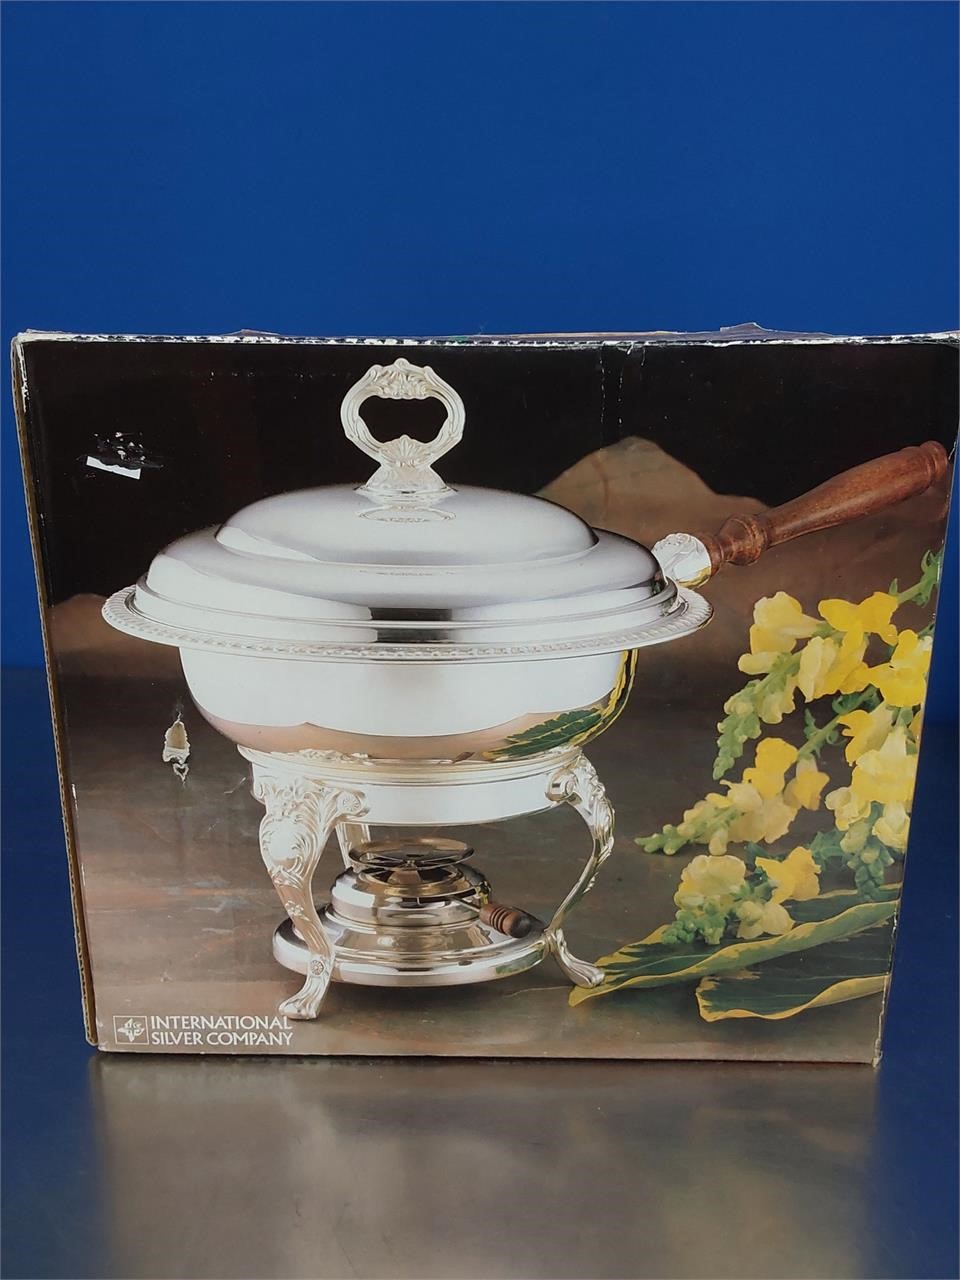 Silverplated Chafing Dish